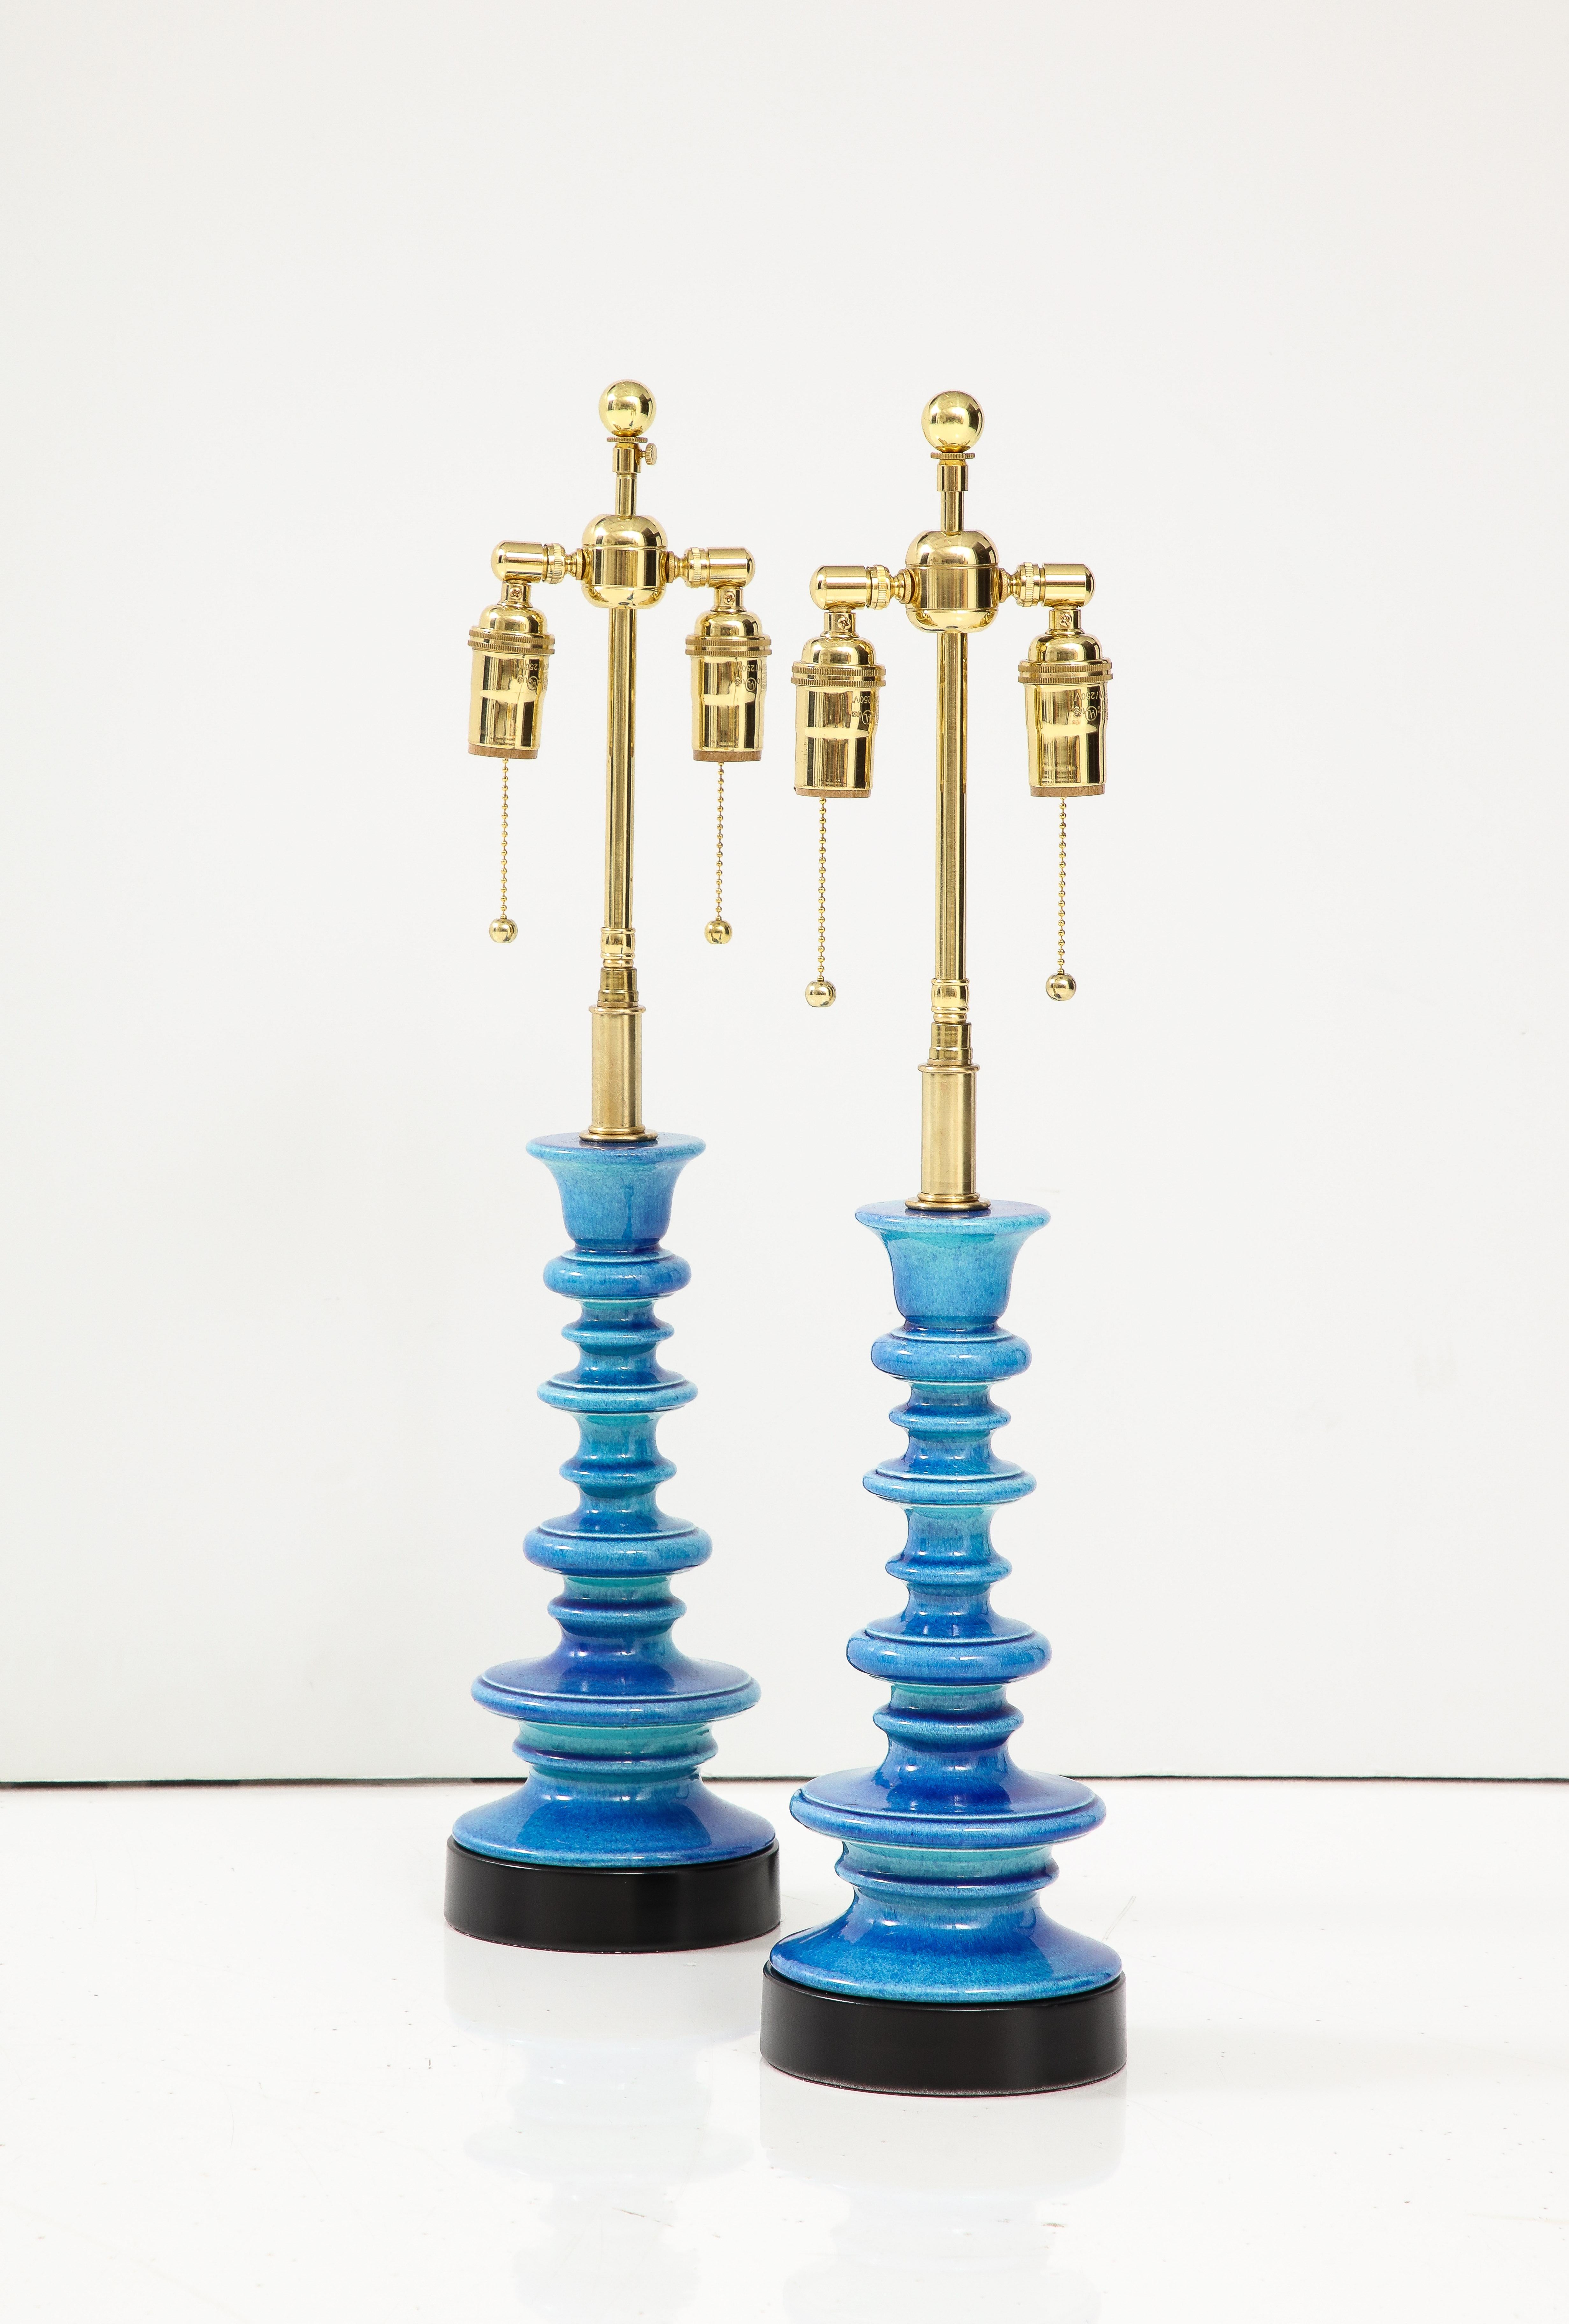 Pair of Pagoda shaped ceramic lamps in a Stunning Cerulean Blue glaze.
The lamps have been newly rewired with adjustable polished brass double clusters that takes standard size light bulbs and silk rayon cords.
Each socket can hold up to 60 watts /